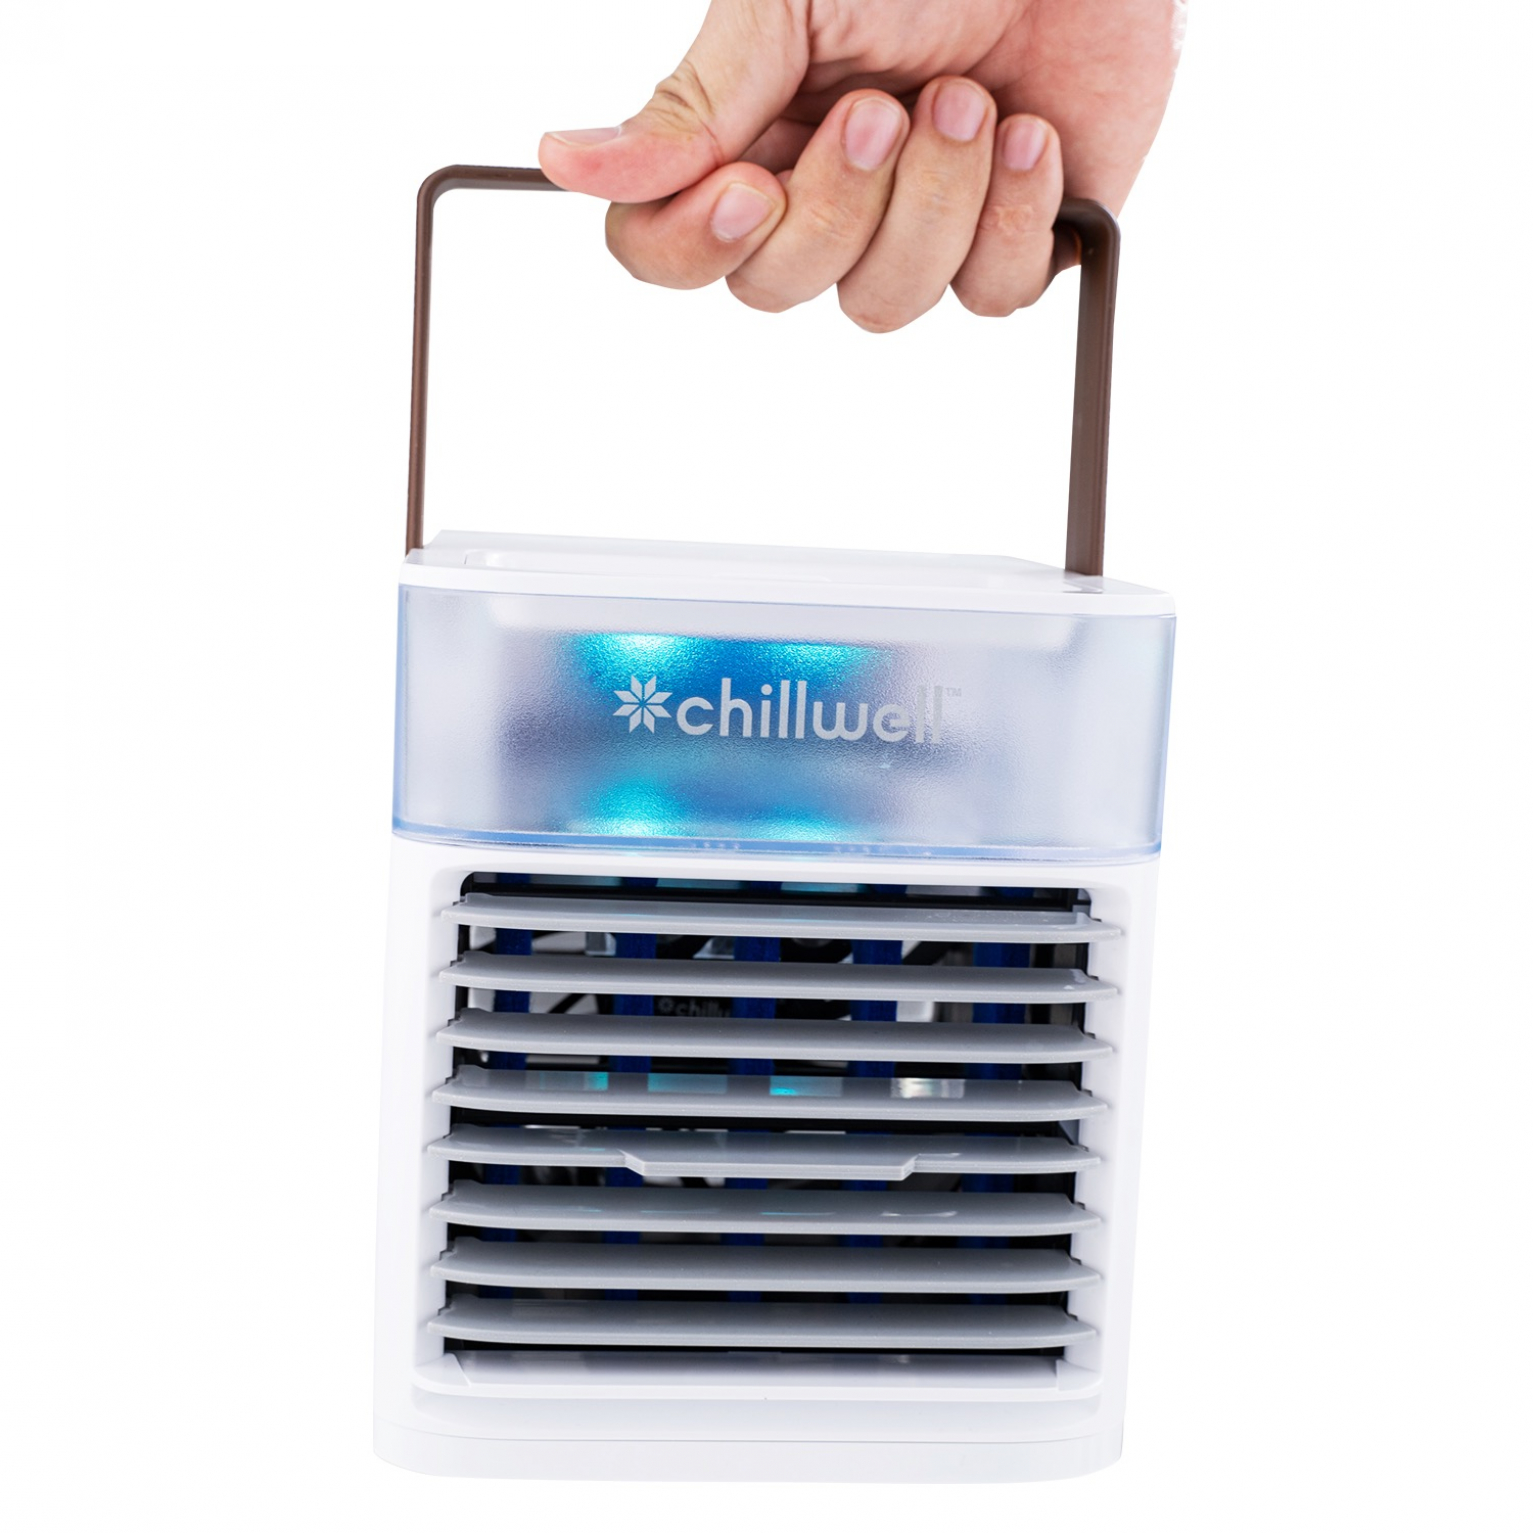 Chillwell AC Deluxe As Seen On Tv